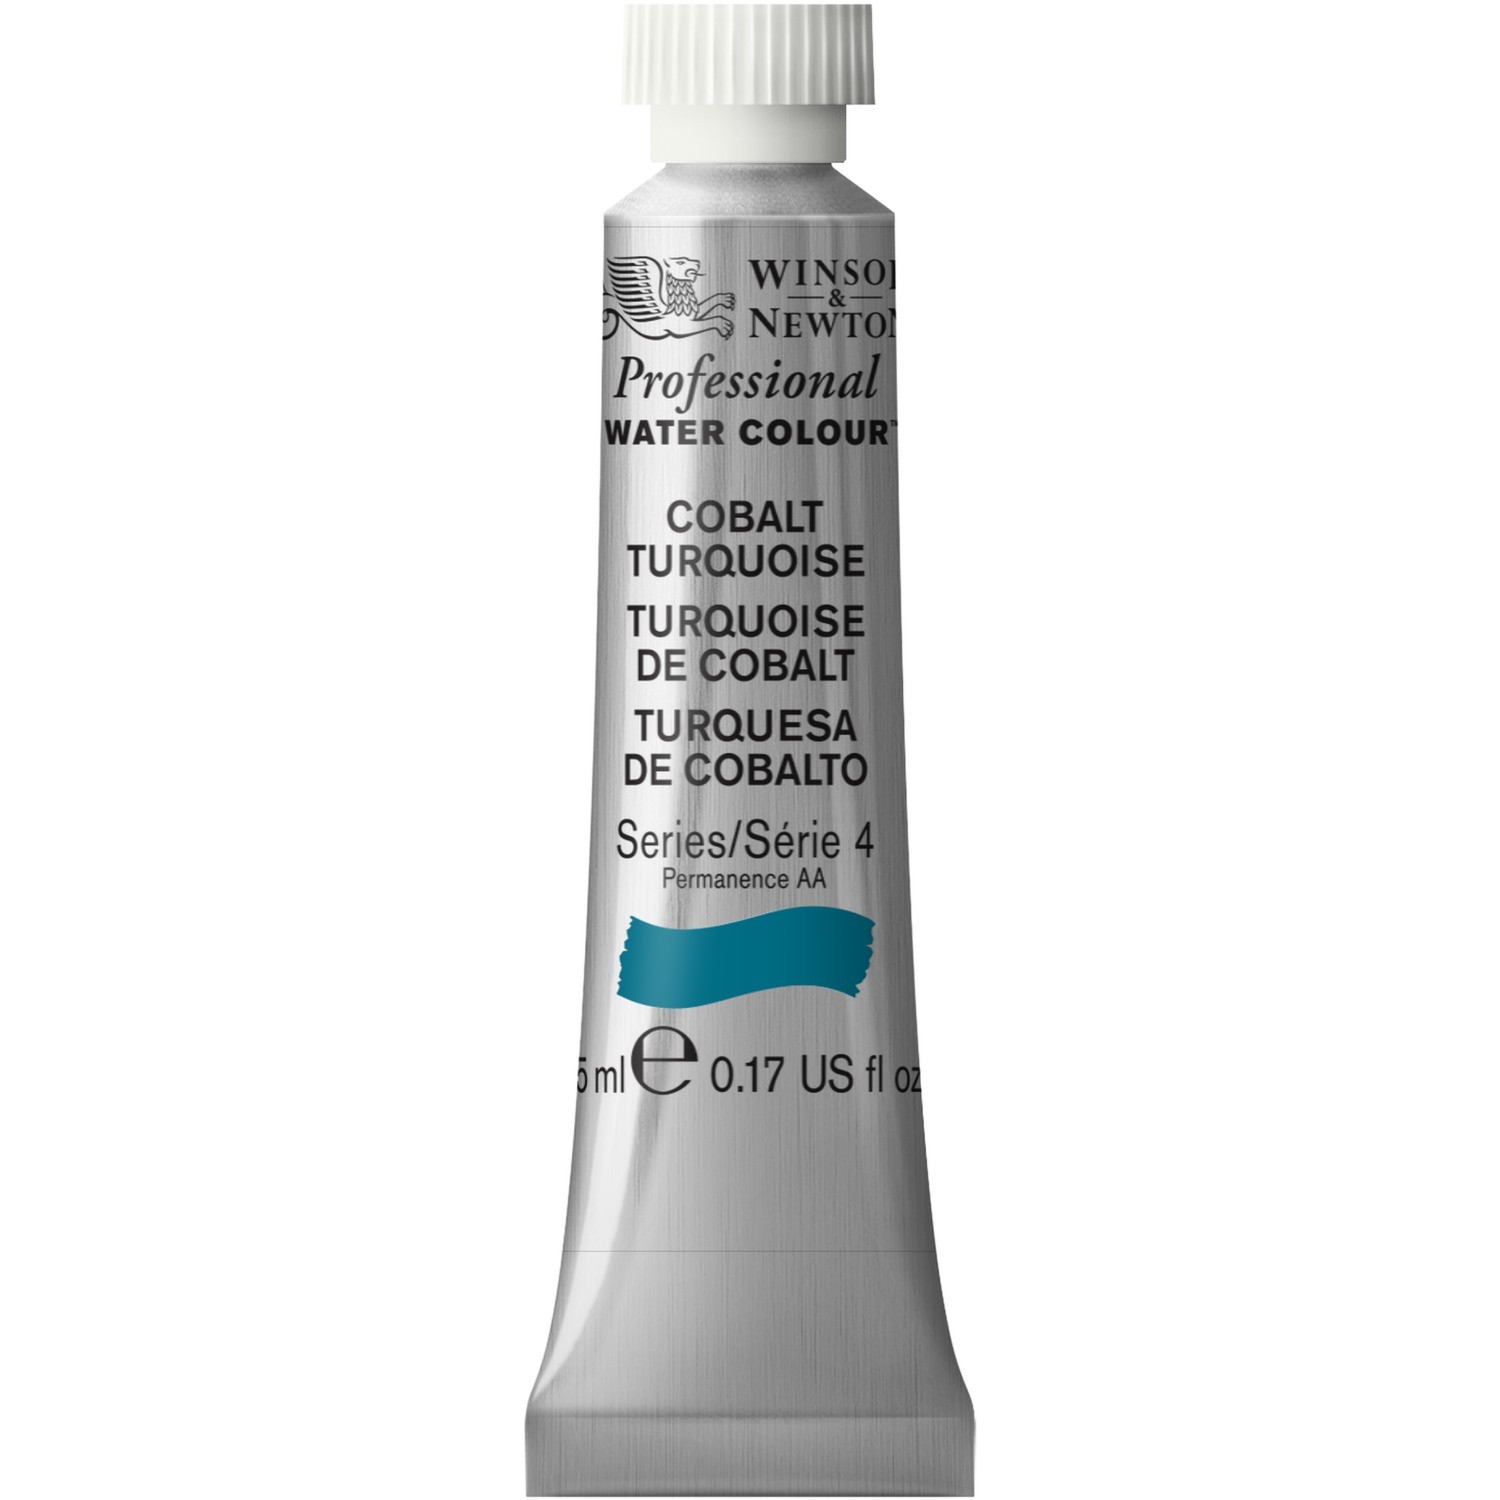 Winsor and Newton 5ml Professional Watercolour Paint - Cobalt Turquoise Image 1